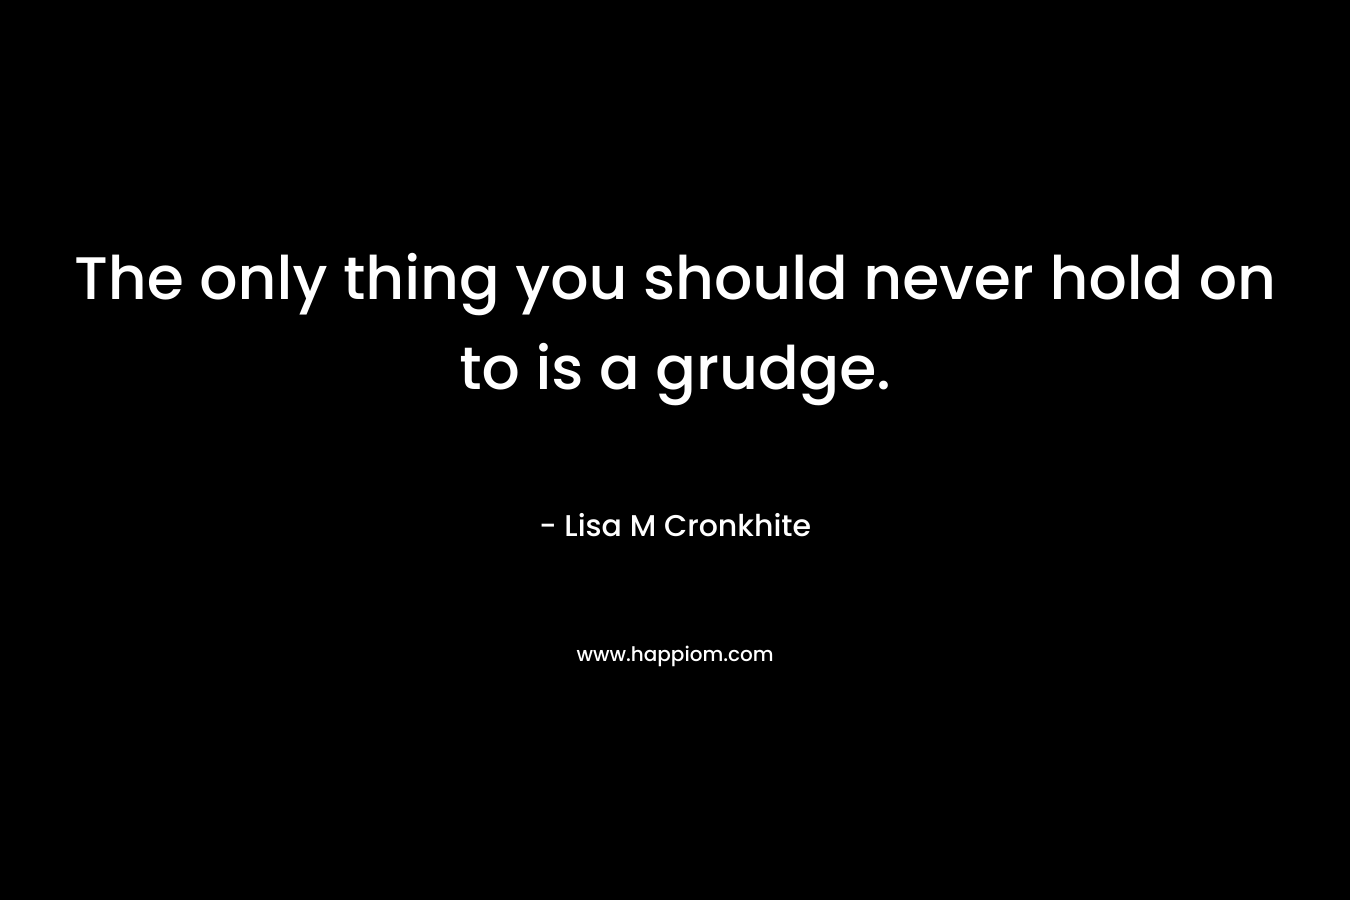 The only thing you should never hold on to is a grudge. – Lisa M Cronkhite